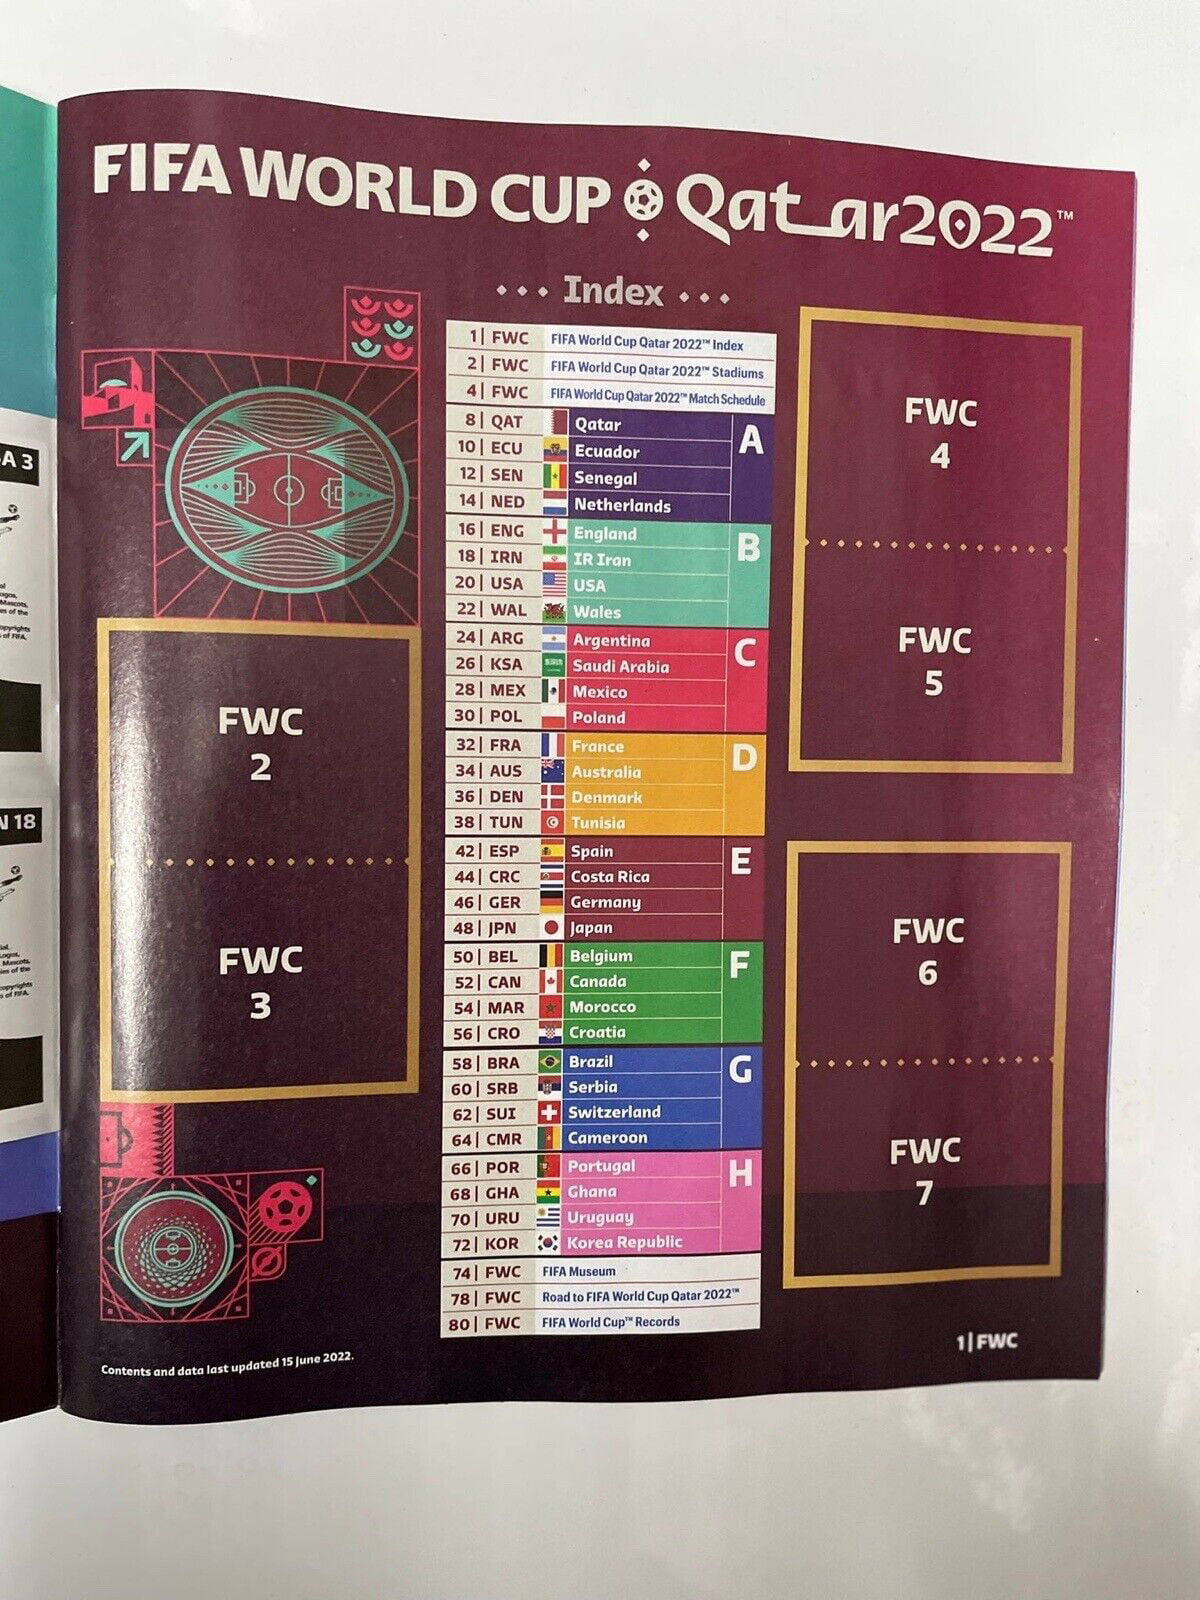 Panini Fifa World Cup Qatar 2022 Album With 2 Sticker Packs Included (Soft  Cover)